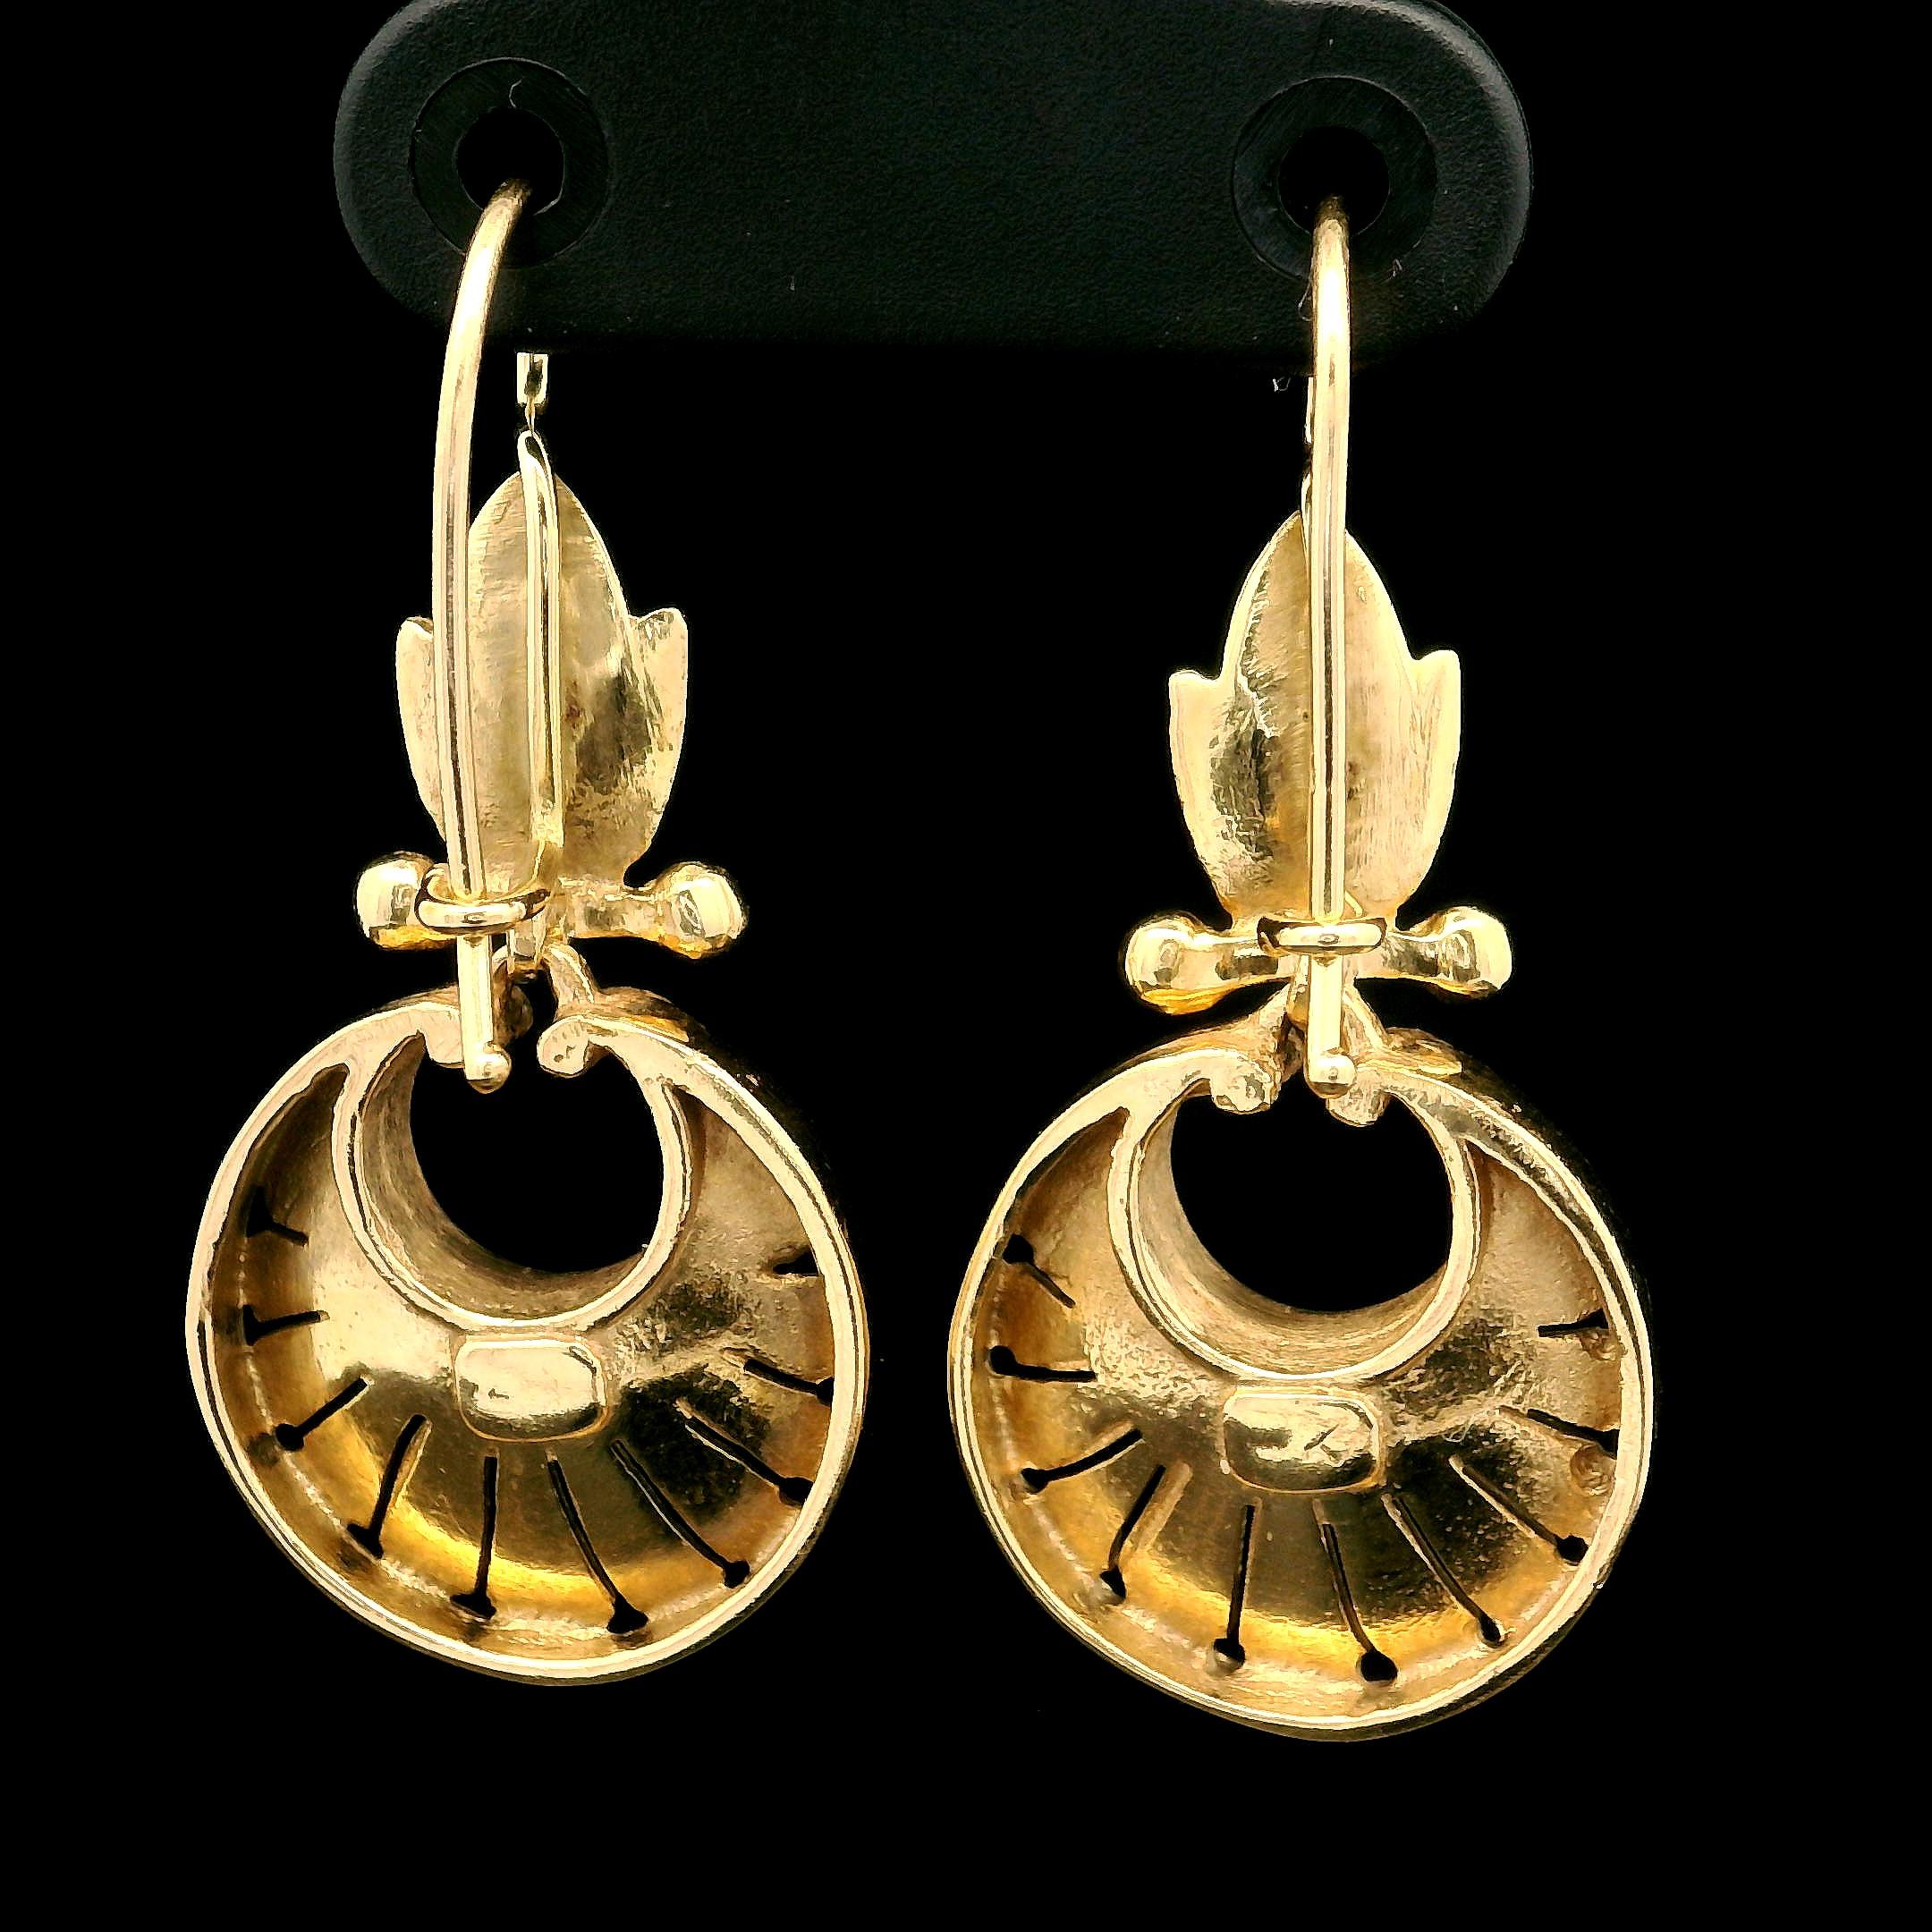 Vintage Etruscan Revival 14k Yellow Gold Ornate Dangle Drop Earrings For Sale 2